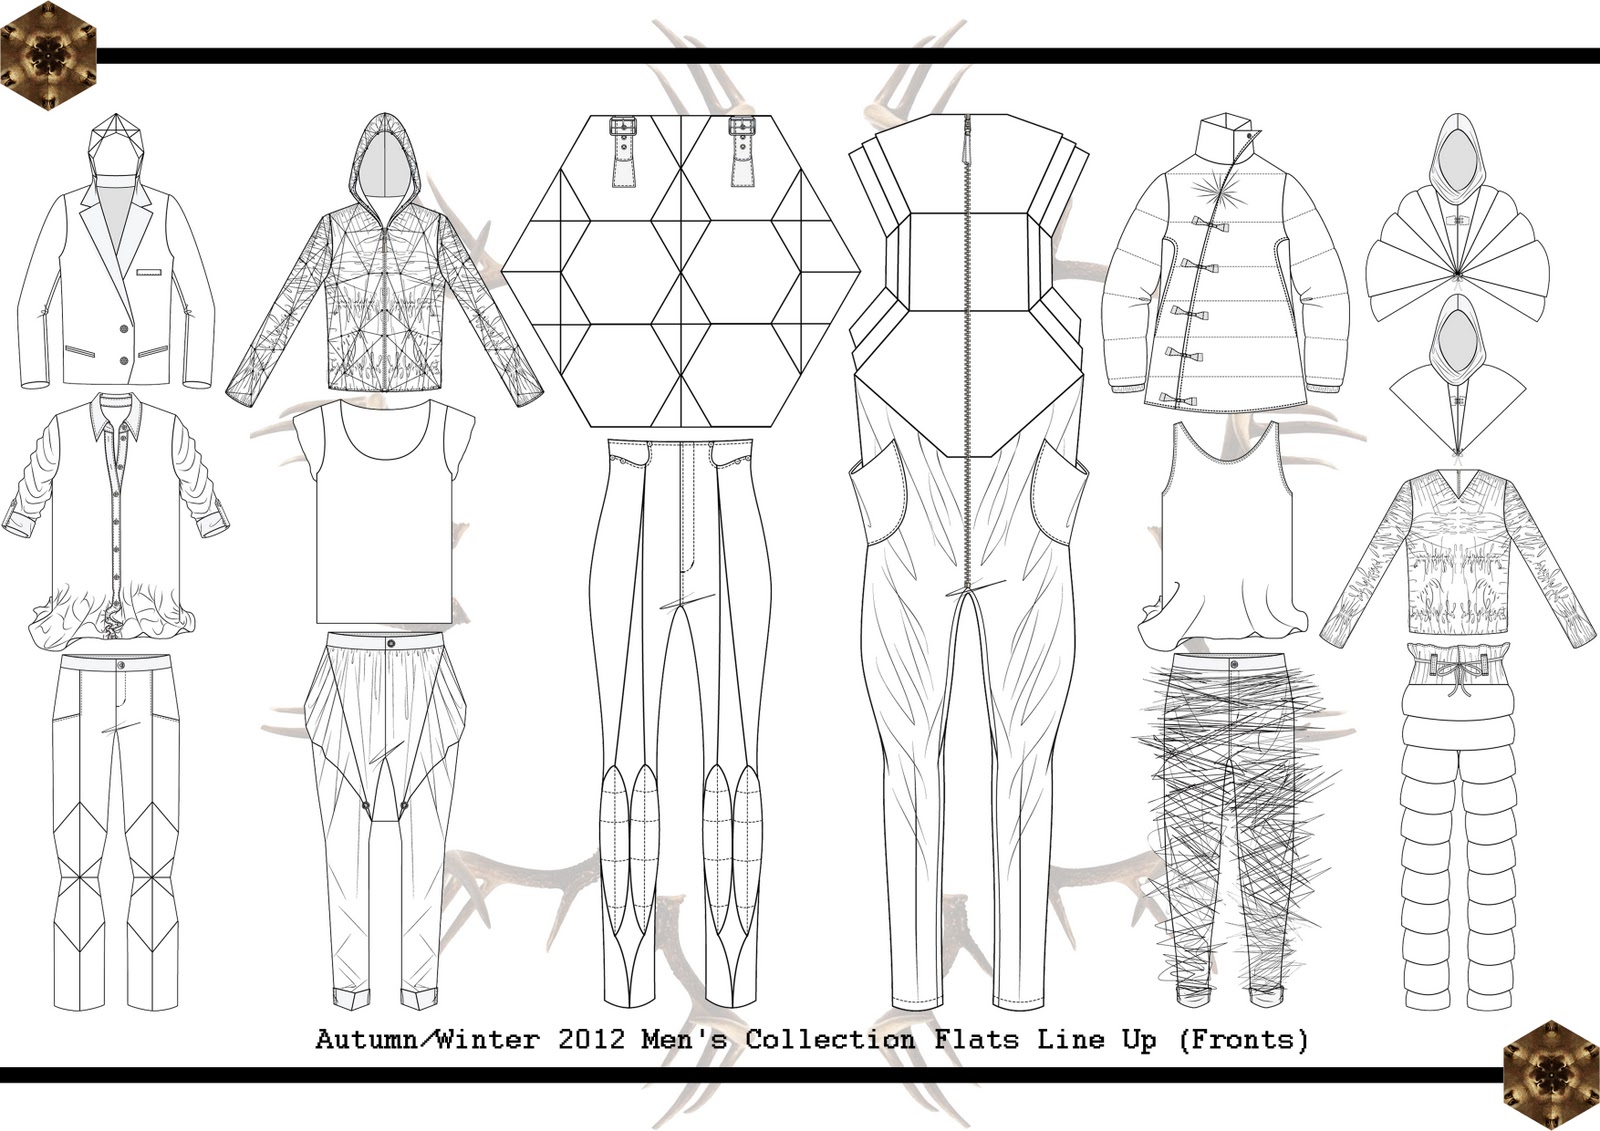 Scott Rennie: A/W 2012 Collection Final Line Up & Flat Drawings Line Up